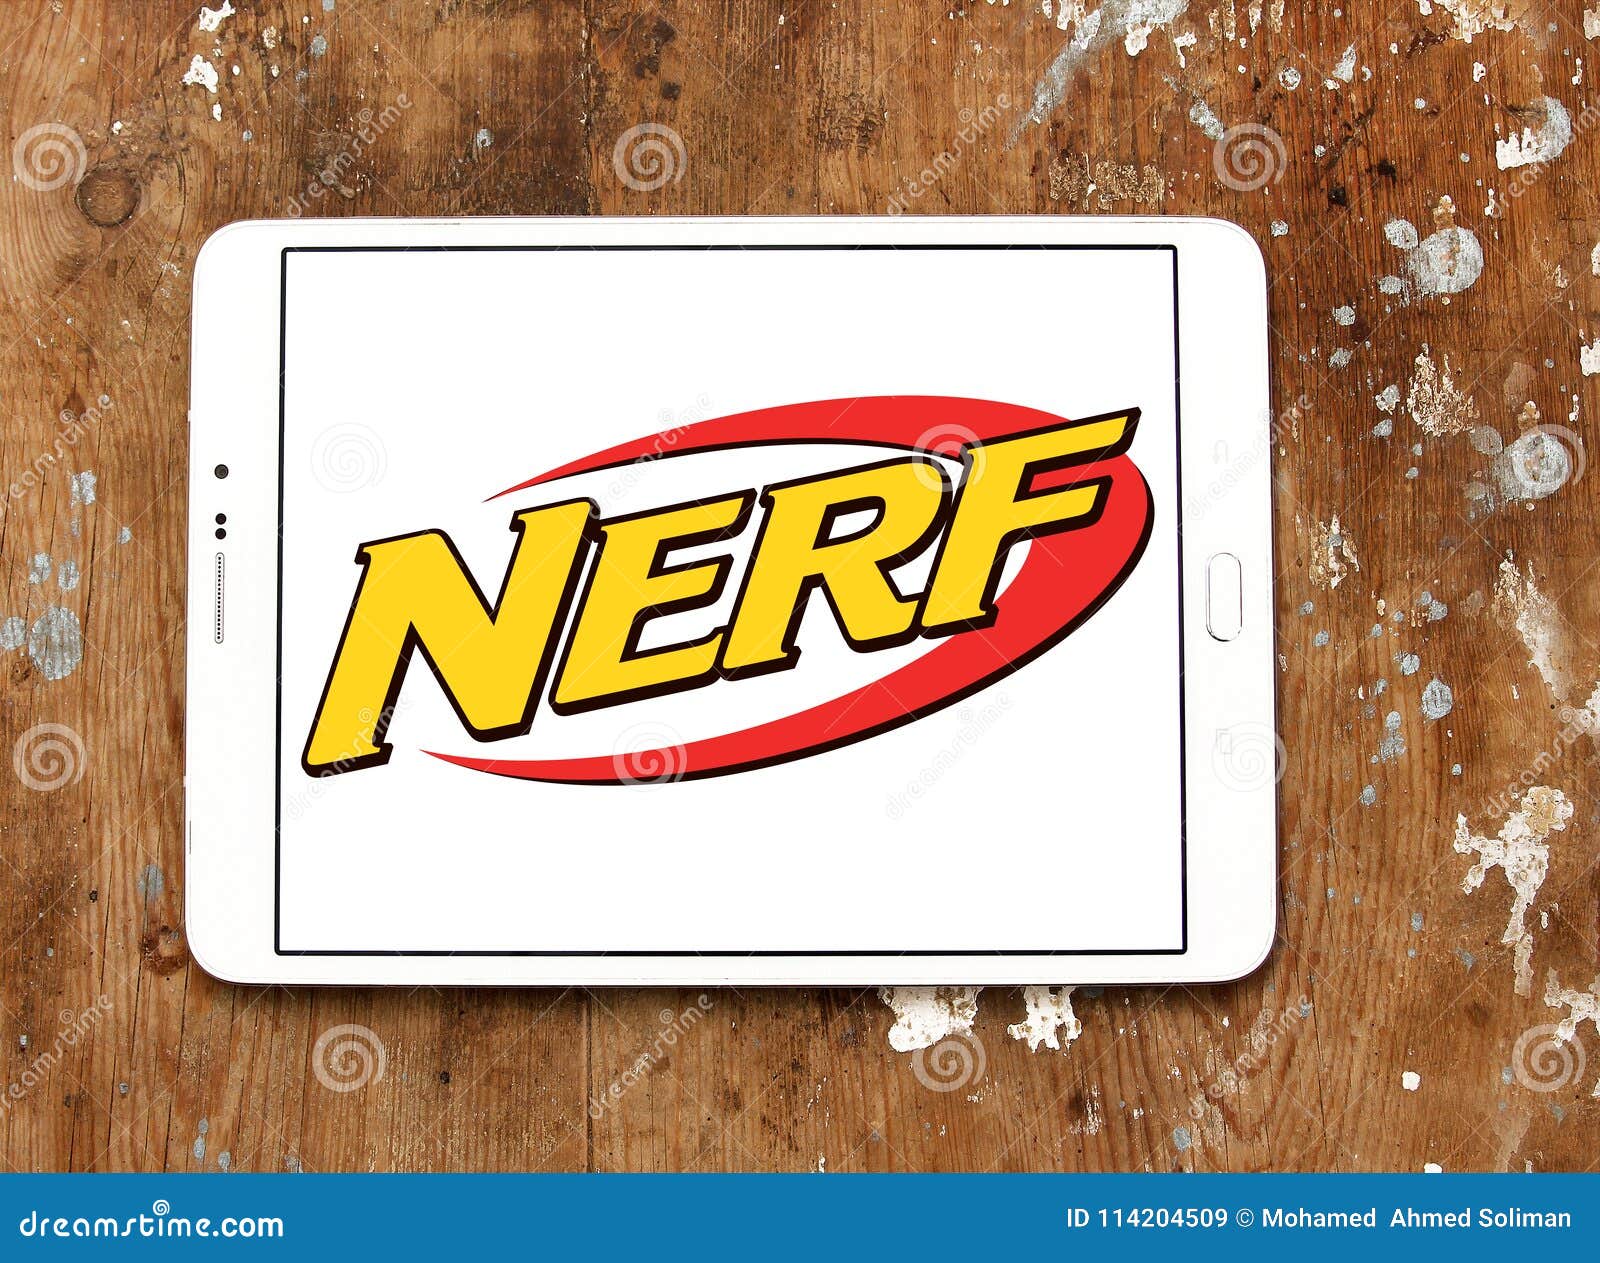 Nerf toy brand logo editorial stock image. Image of game - 114204509